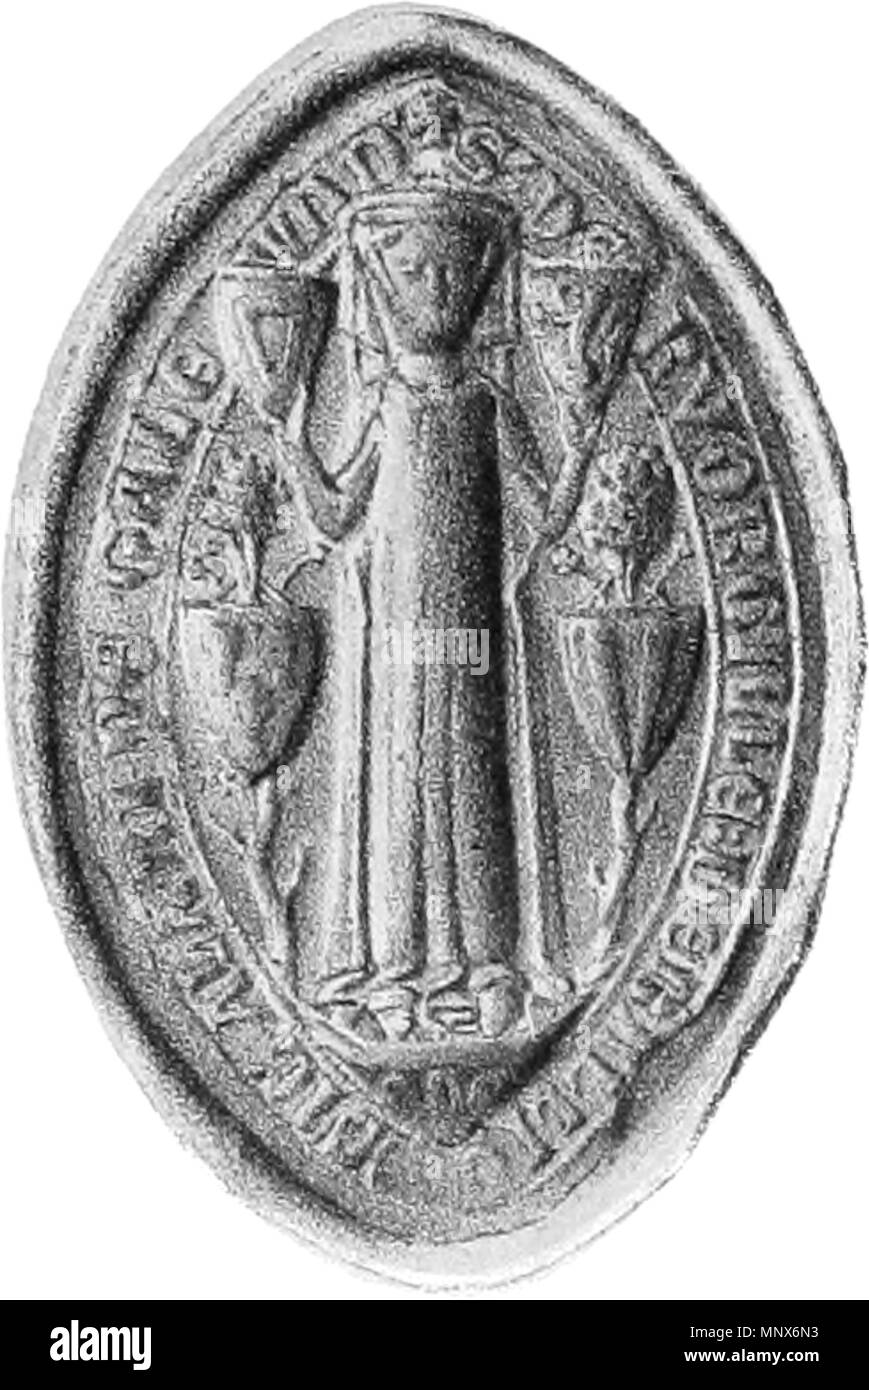 . English: Seal of Dervorguilla of Galloway. It is appended to the foundation charter of Balliol College, Oxford. The shields are, clockwise: Her personal arms as a daughter of the Lord of Galloway: azure, a lion rampant argent crowned or The arms of her stepmother Margaret of Huntingdon: or, three piles gules The arms of her mother, a daughter of Roger de Lacy, Constable of Chester: per pale gules and azure, three garbs or The arms of her husband John Balliol: gules, an orle argent  . The illustration dates no later than 1866, the year the book was published. The seal itself dates to the late Stock Photo